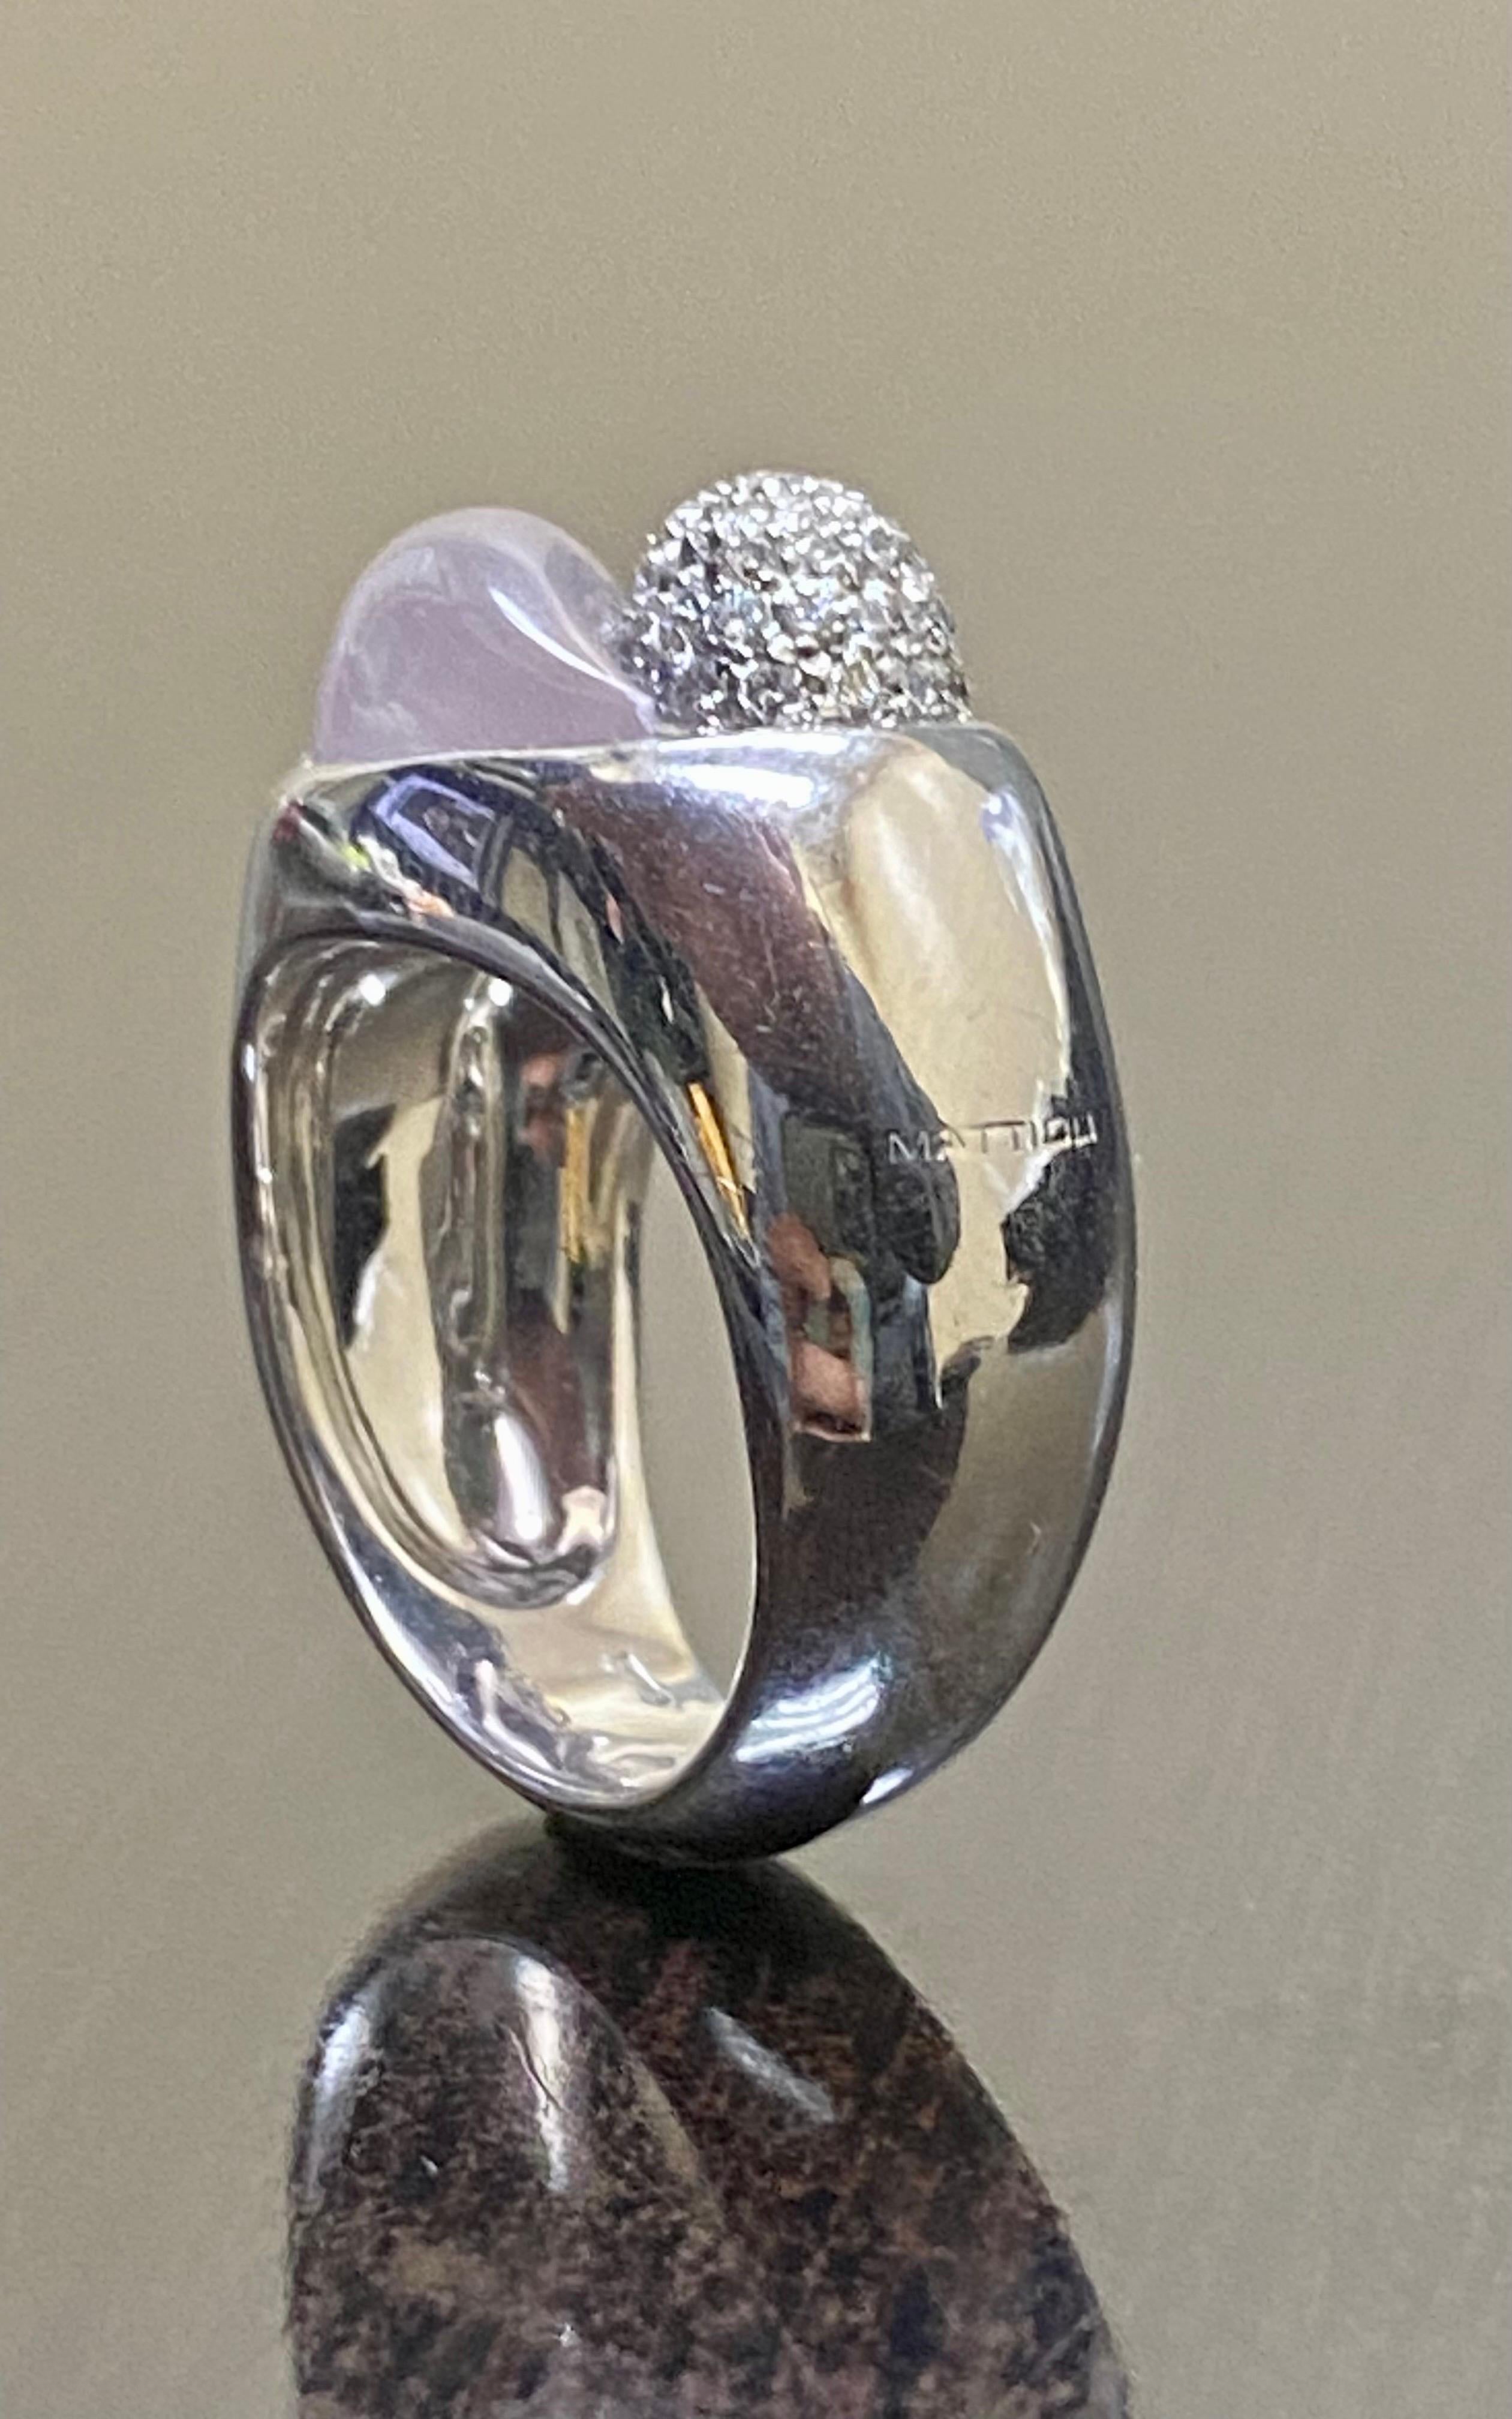 18K White Gold Rose Quartz Pave Diamond Yin Yang Mattioli Ring In Excellent Condition For Sale In Los Angeles, CA